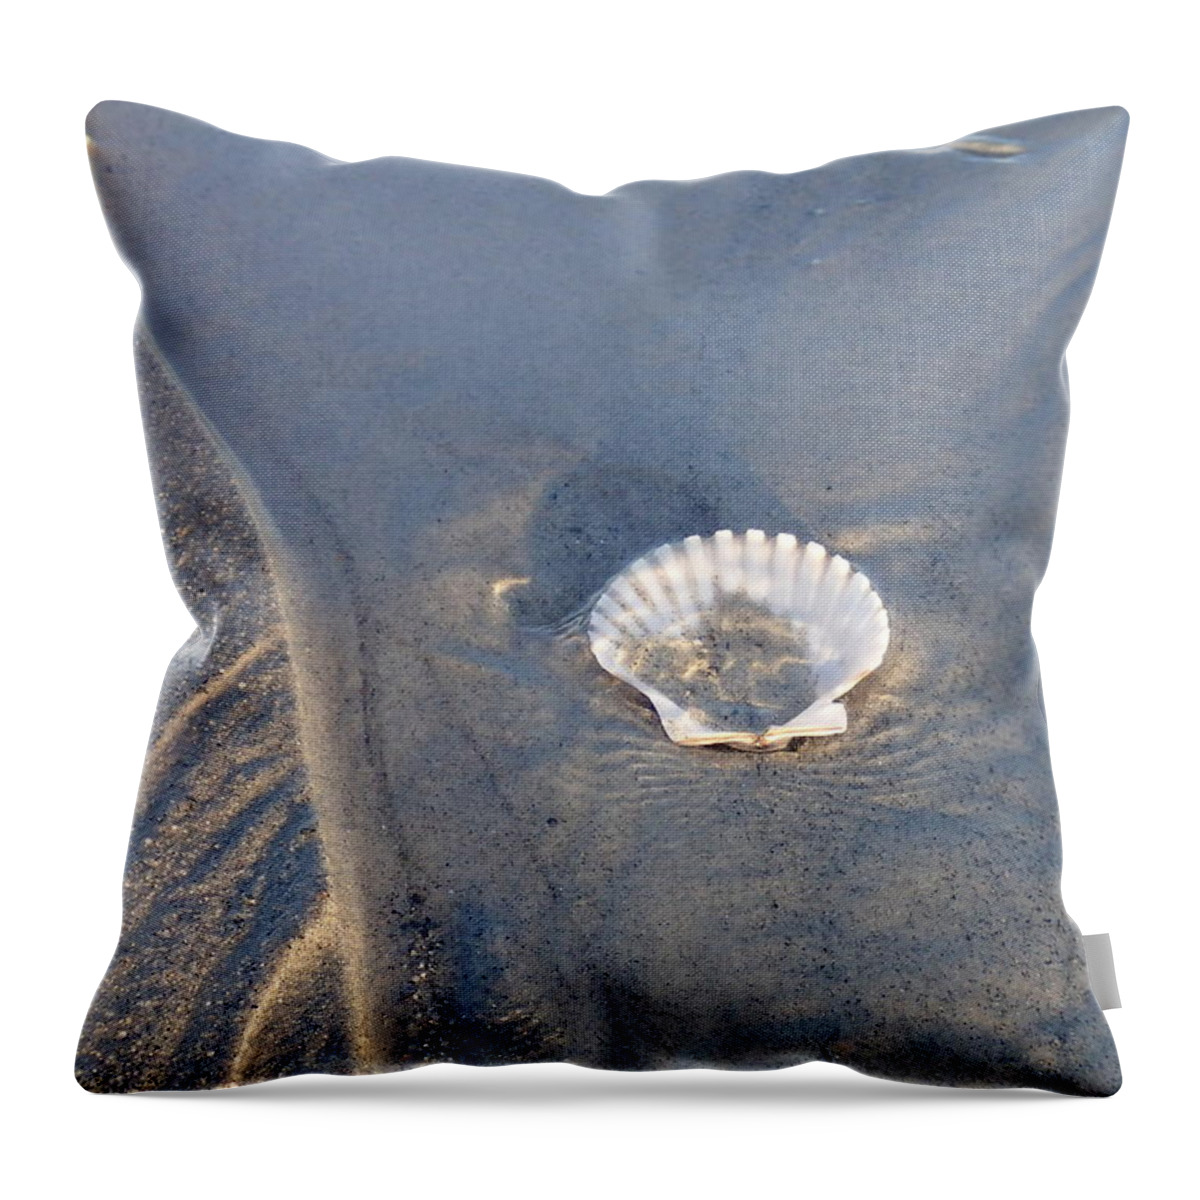 Shell Throw Pillow featuring the photograph Shell by Robert Nickologianis